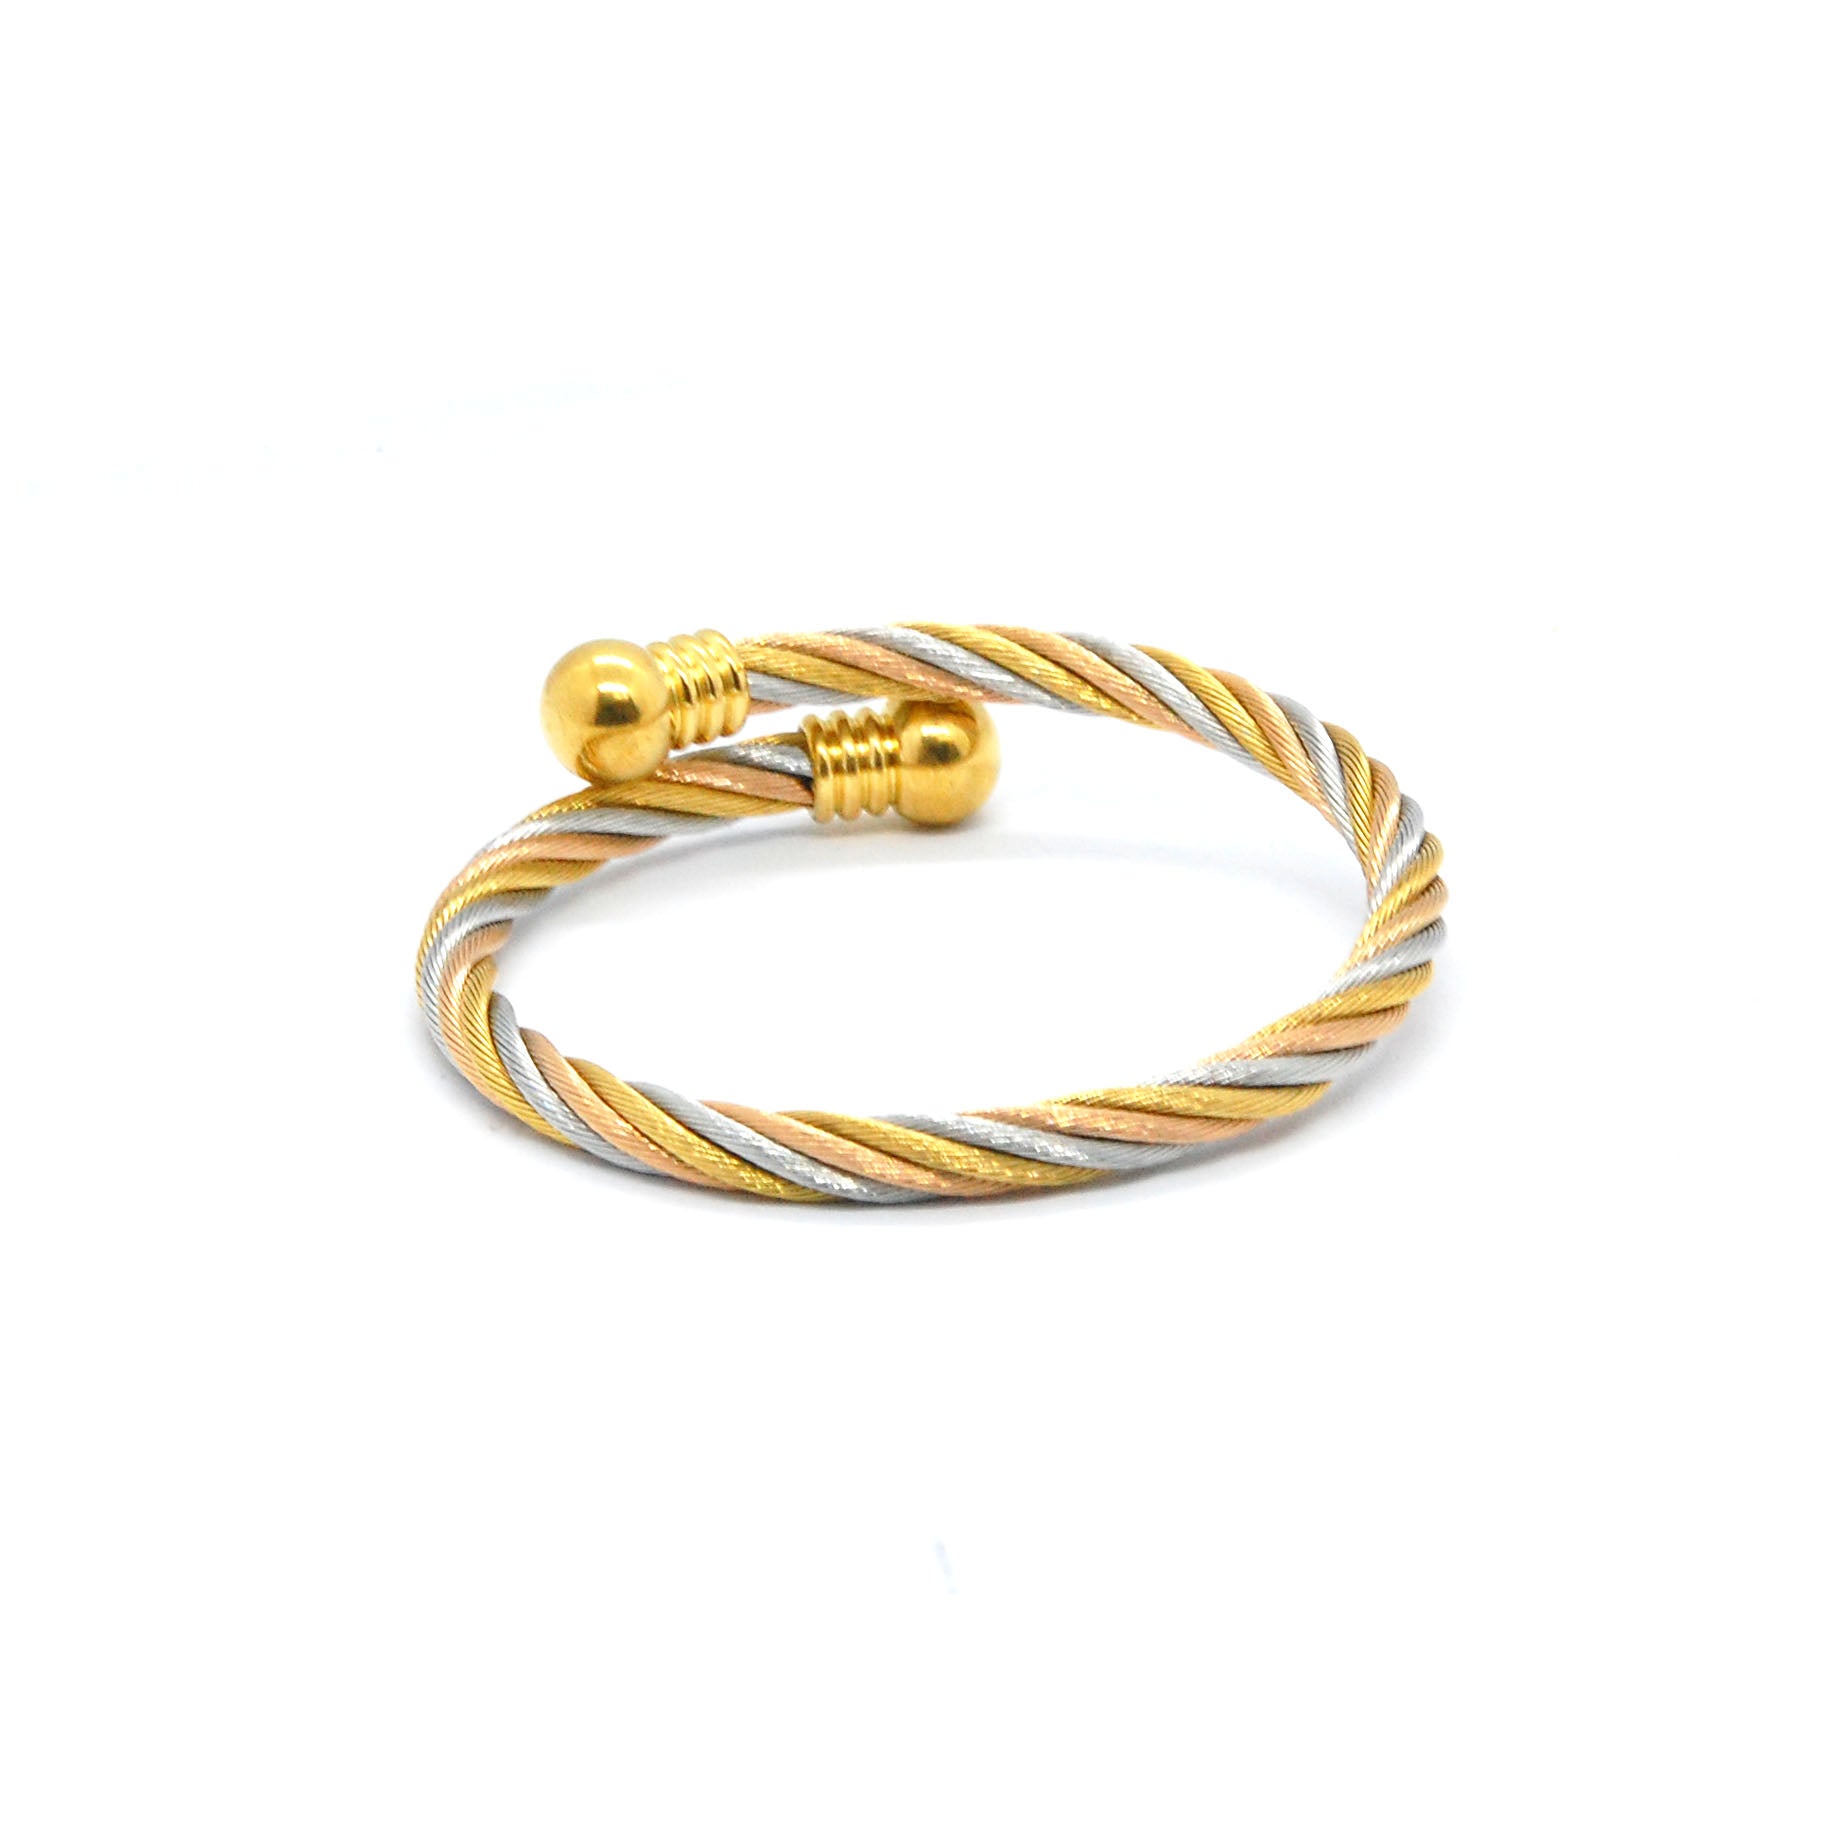 ESBG 6717: 3-Tone Twisted Charriol Bangle w/ Gold Plated Round Ends